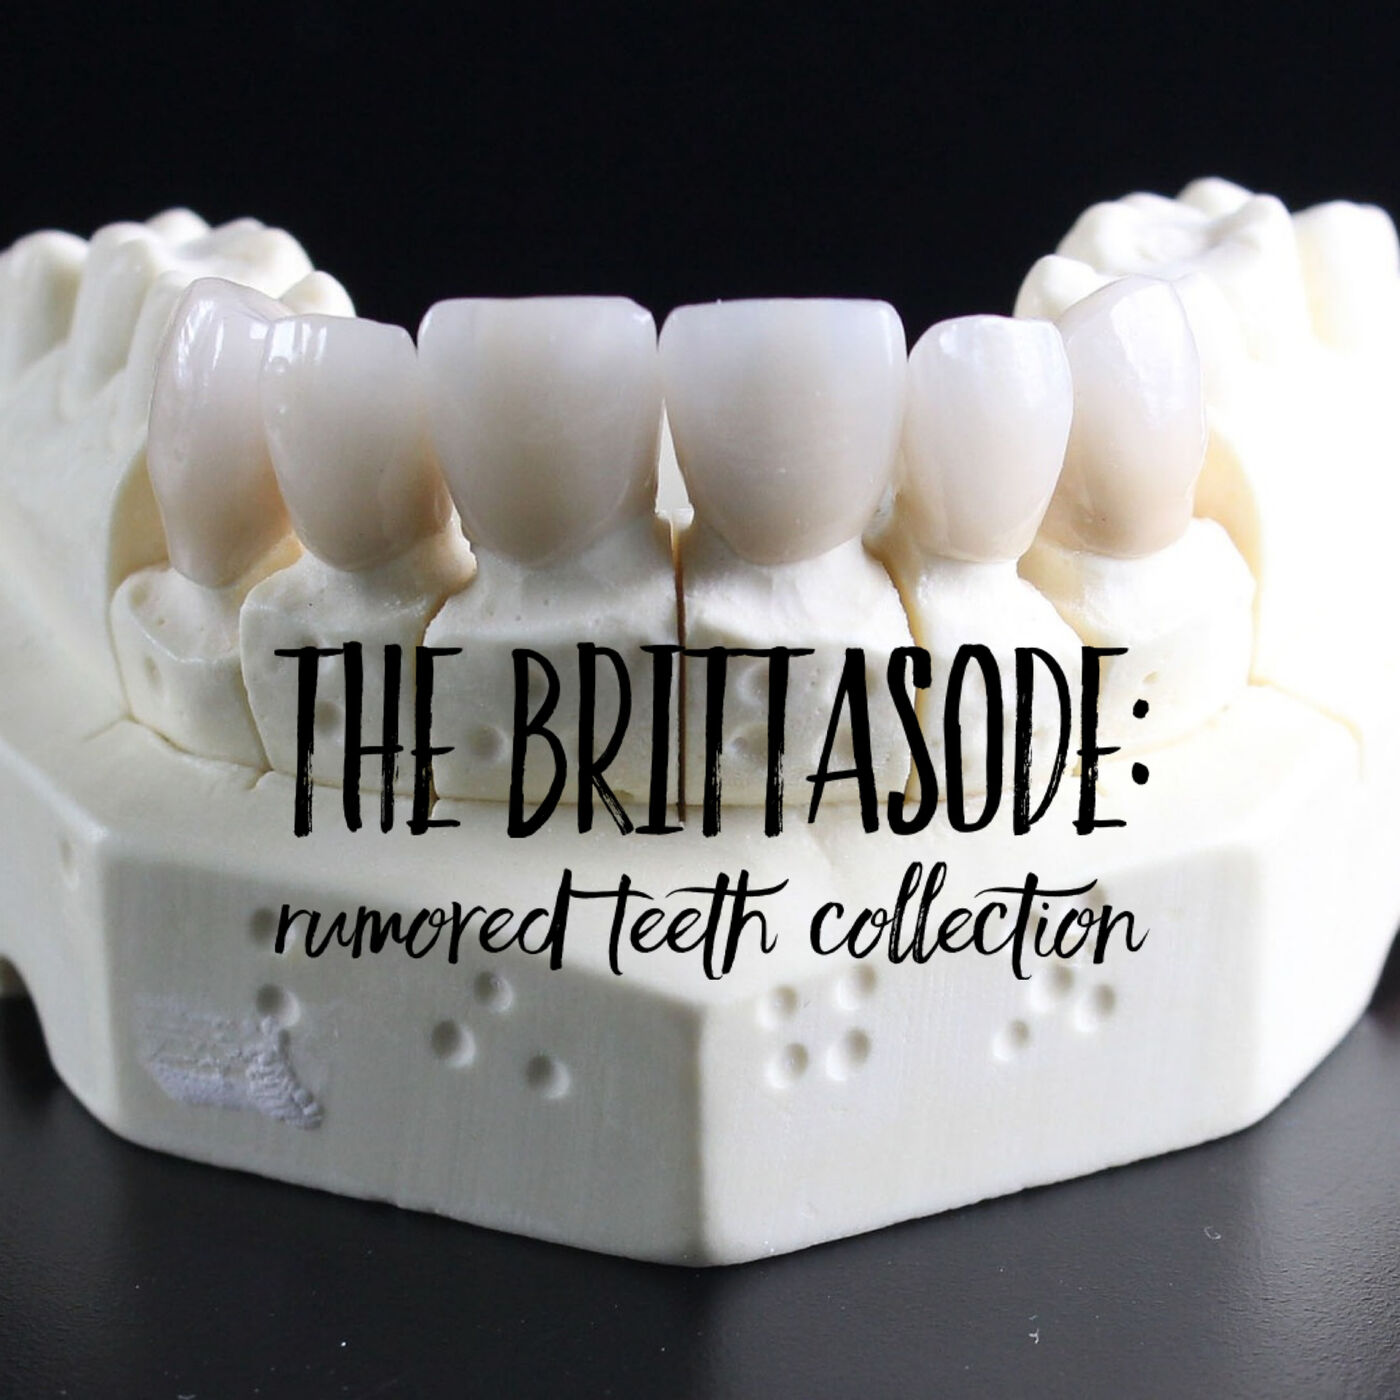 The Brittasode: Rumored Teeth Collection